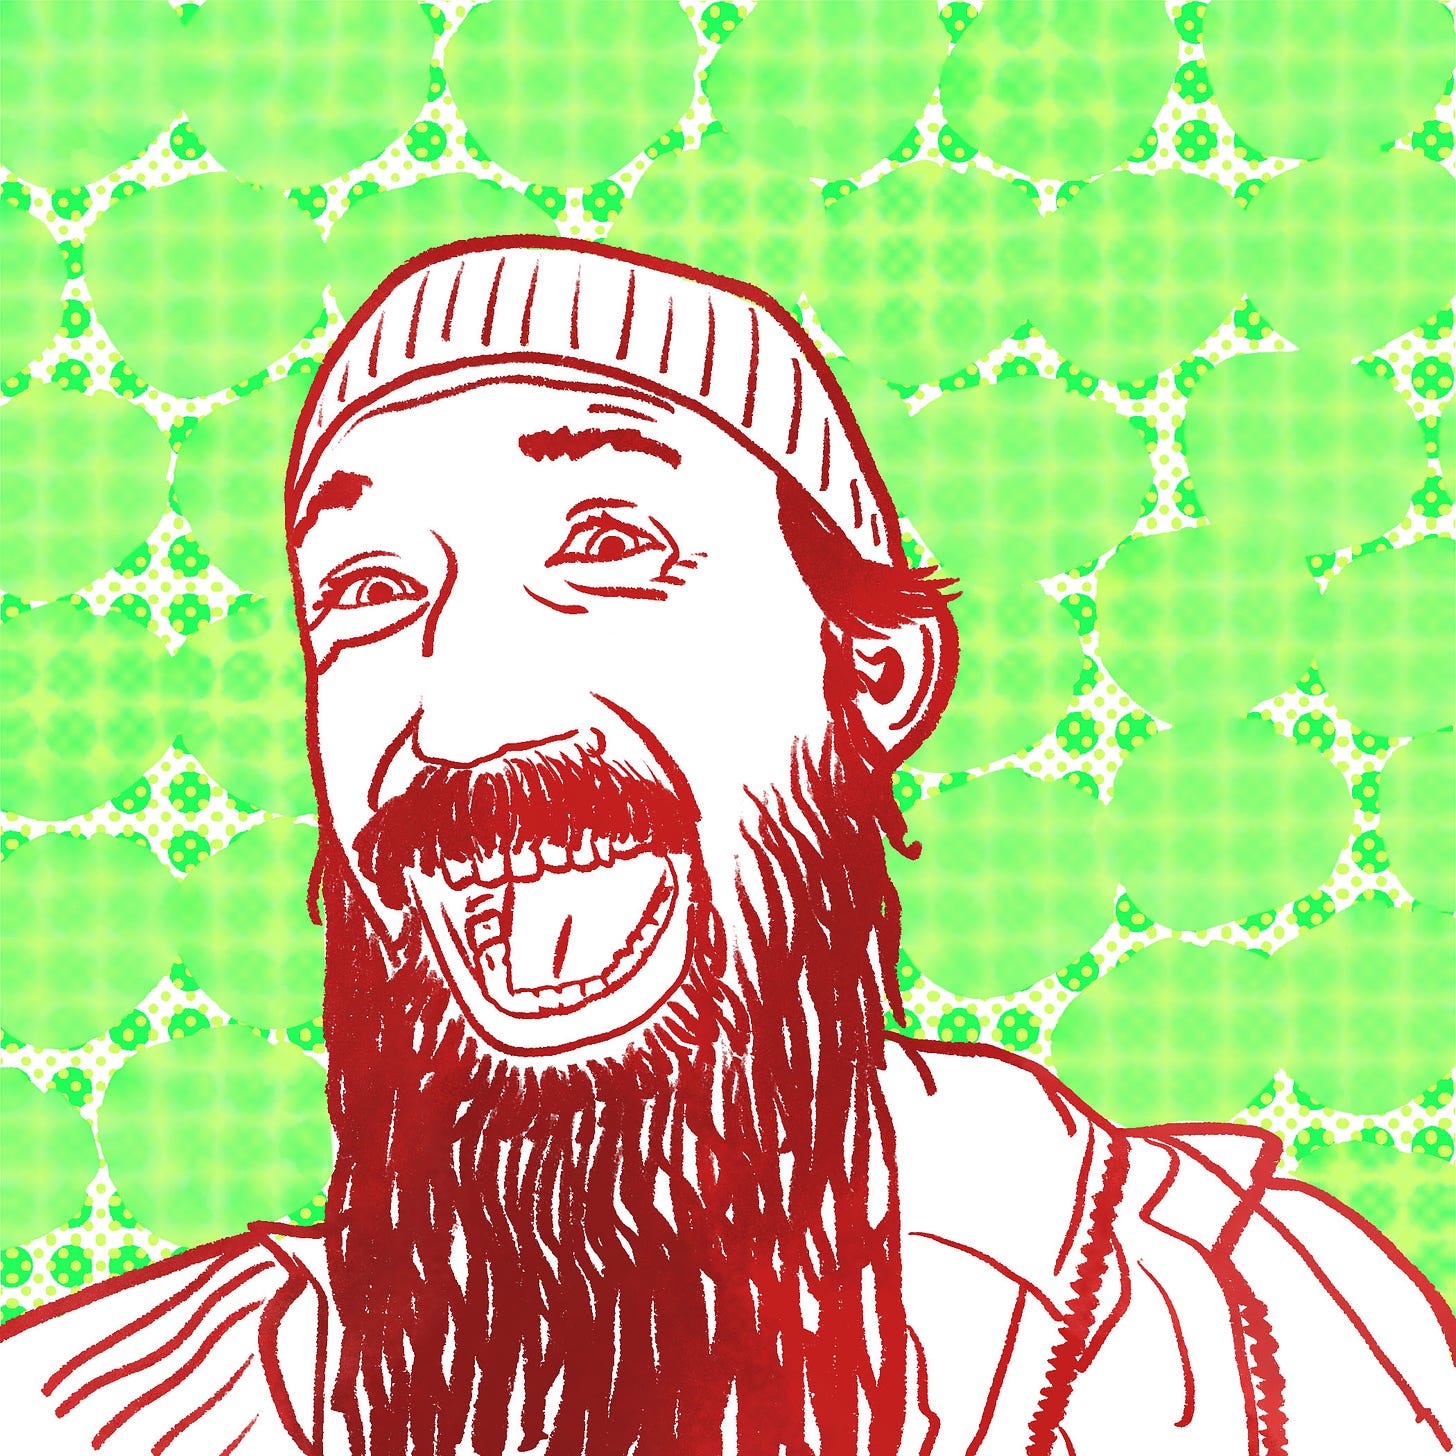 An illustration of Jason with a large smile on their face and wearing a beanie. 